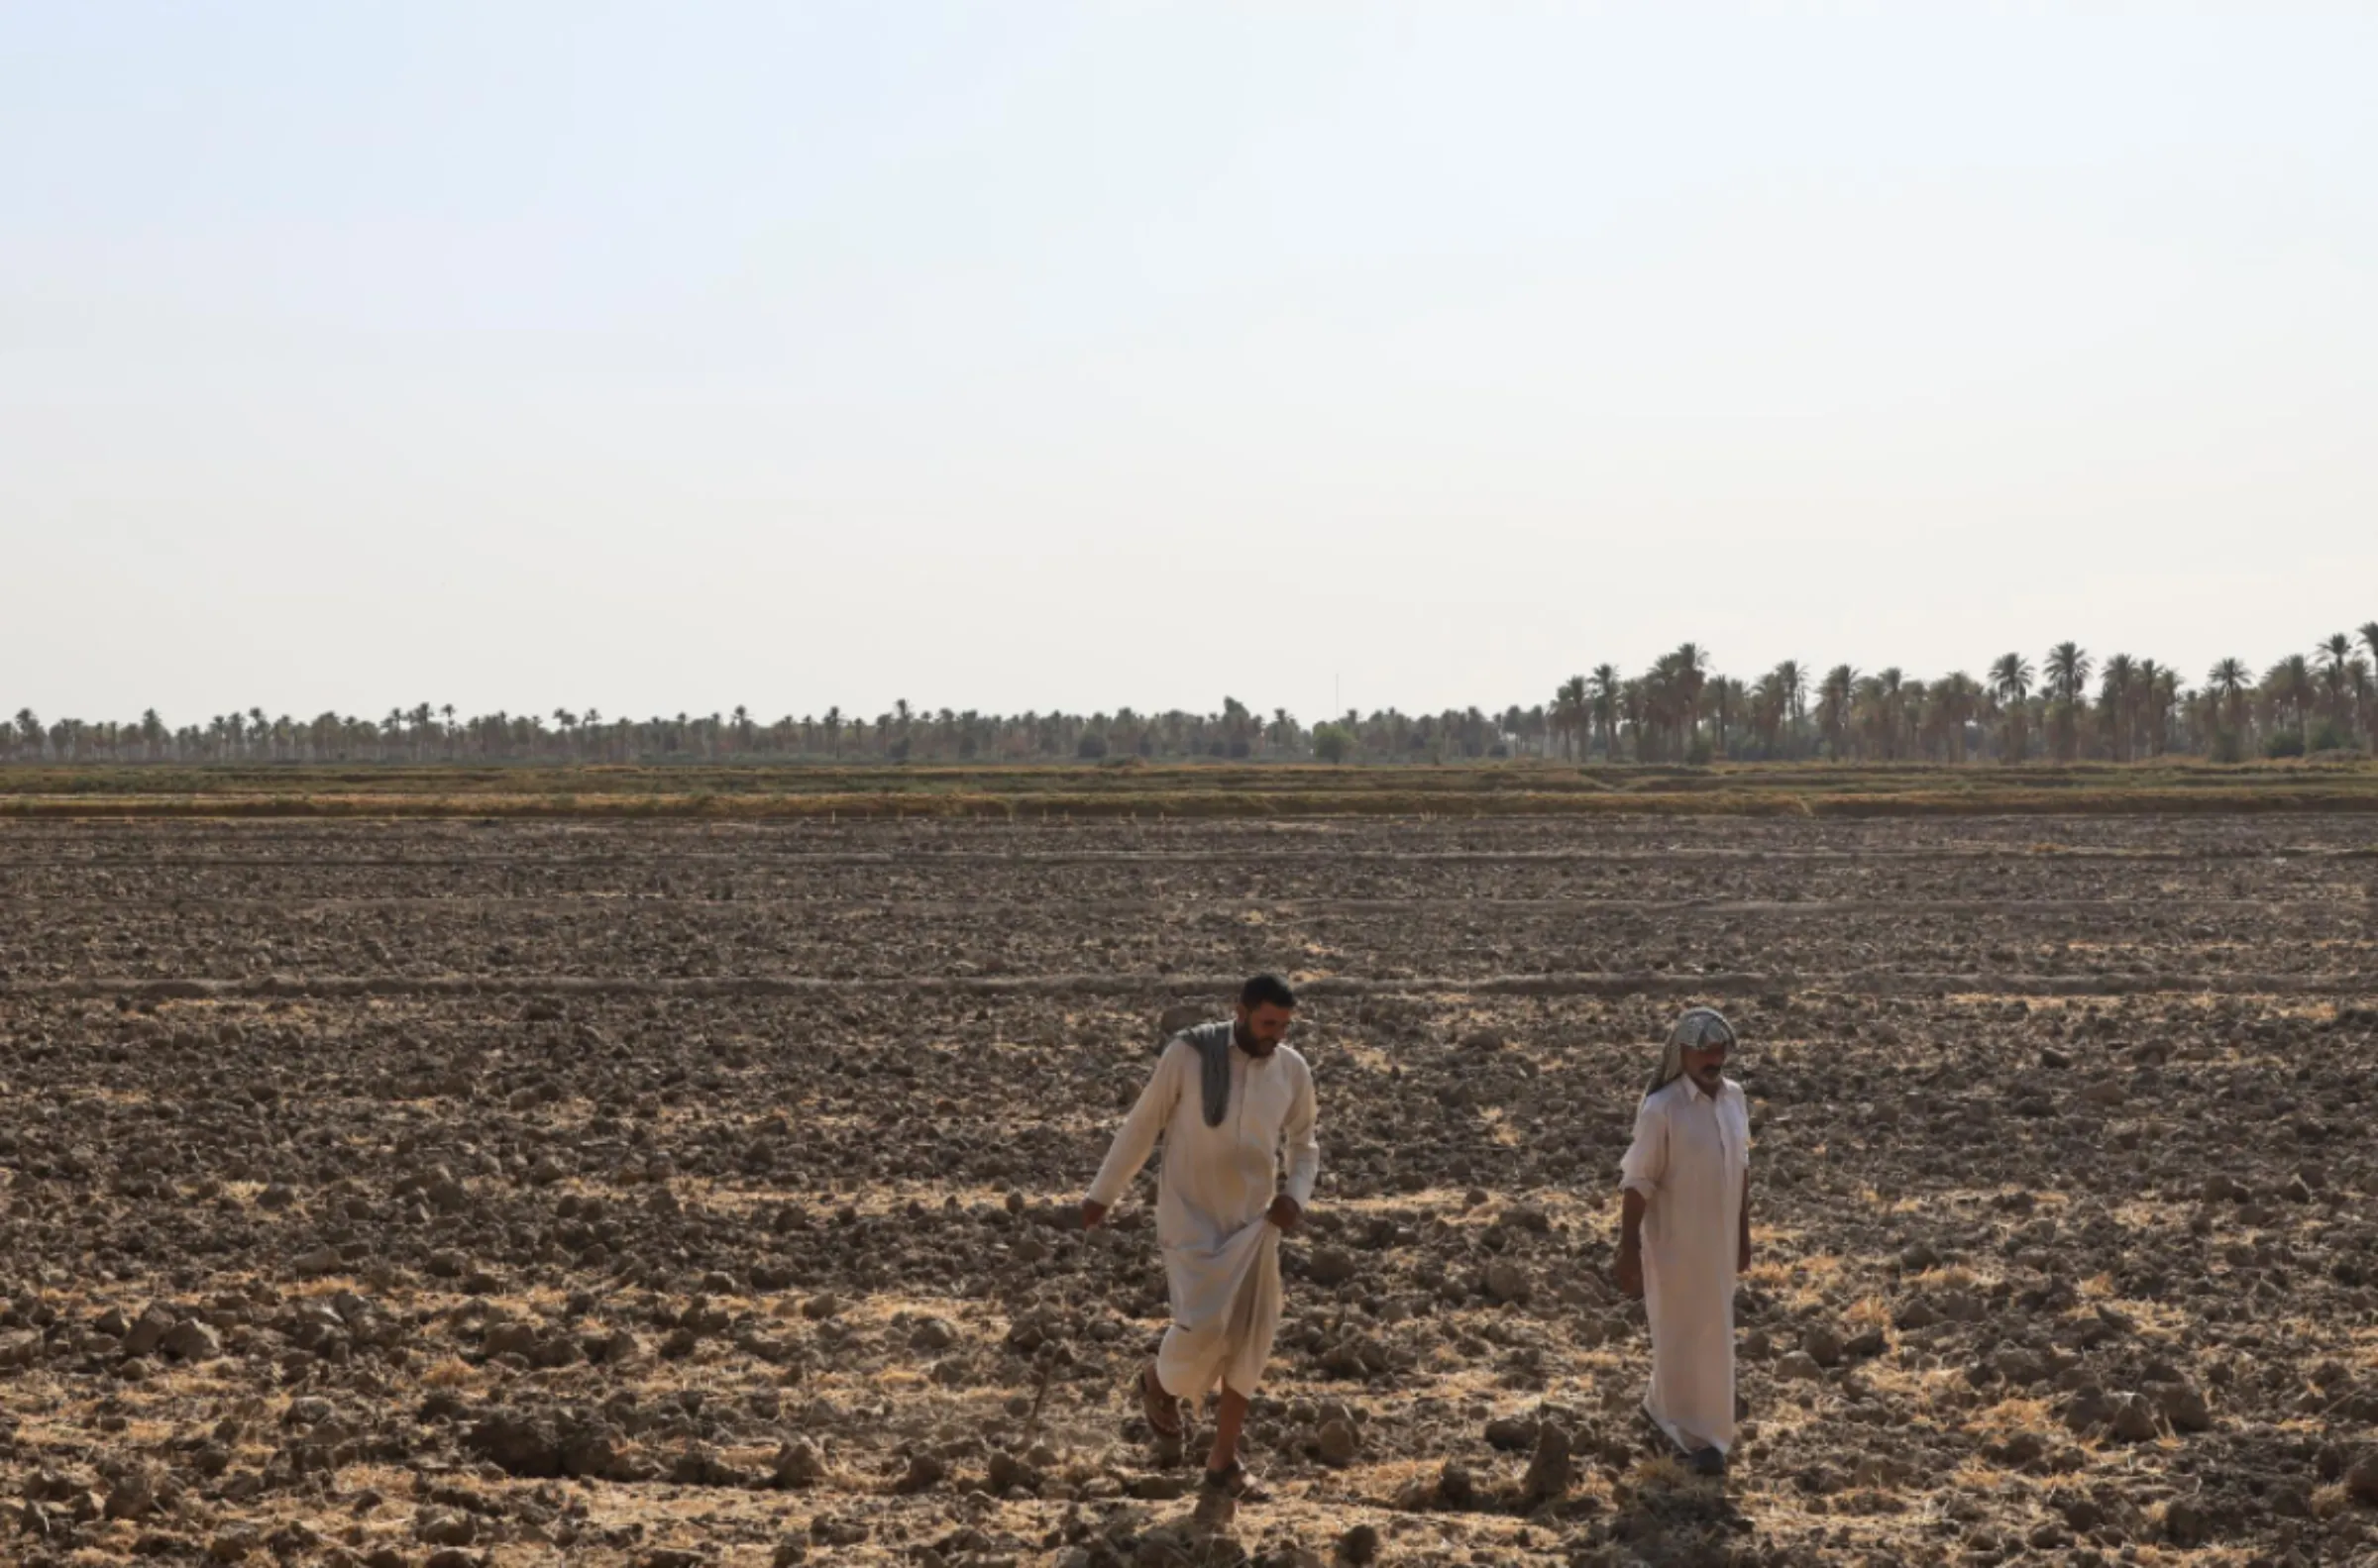 Abed al-Hussein Kusayr and his son walk on their farm in al-Meshkhab district in Najaf, Iraq, October, 12, 2022